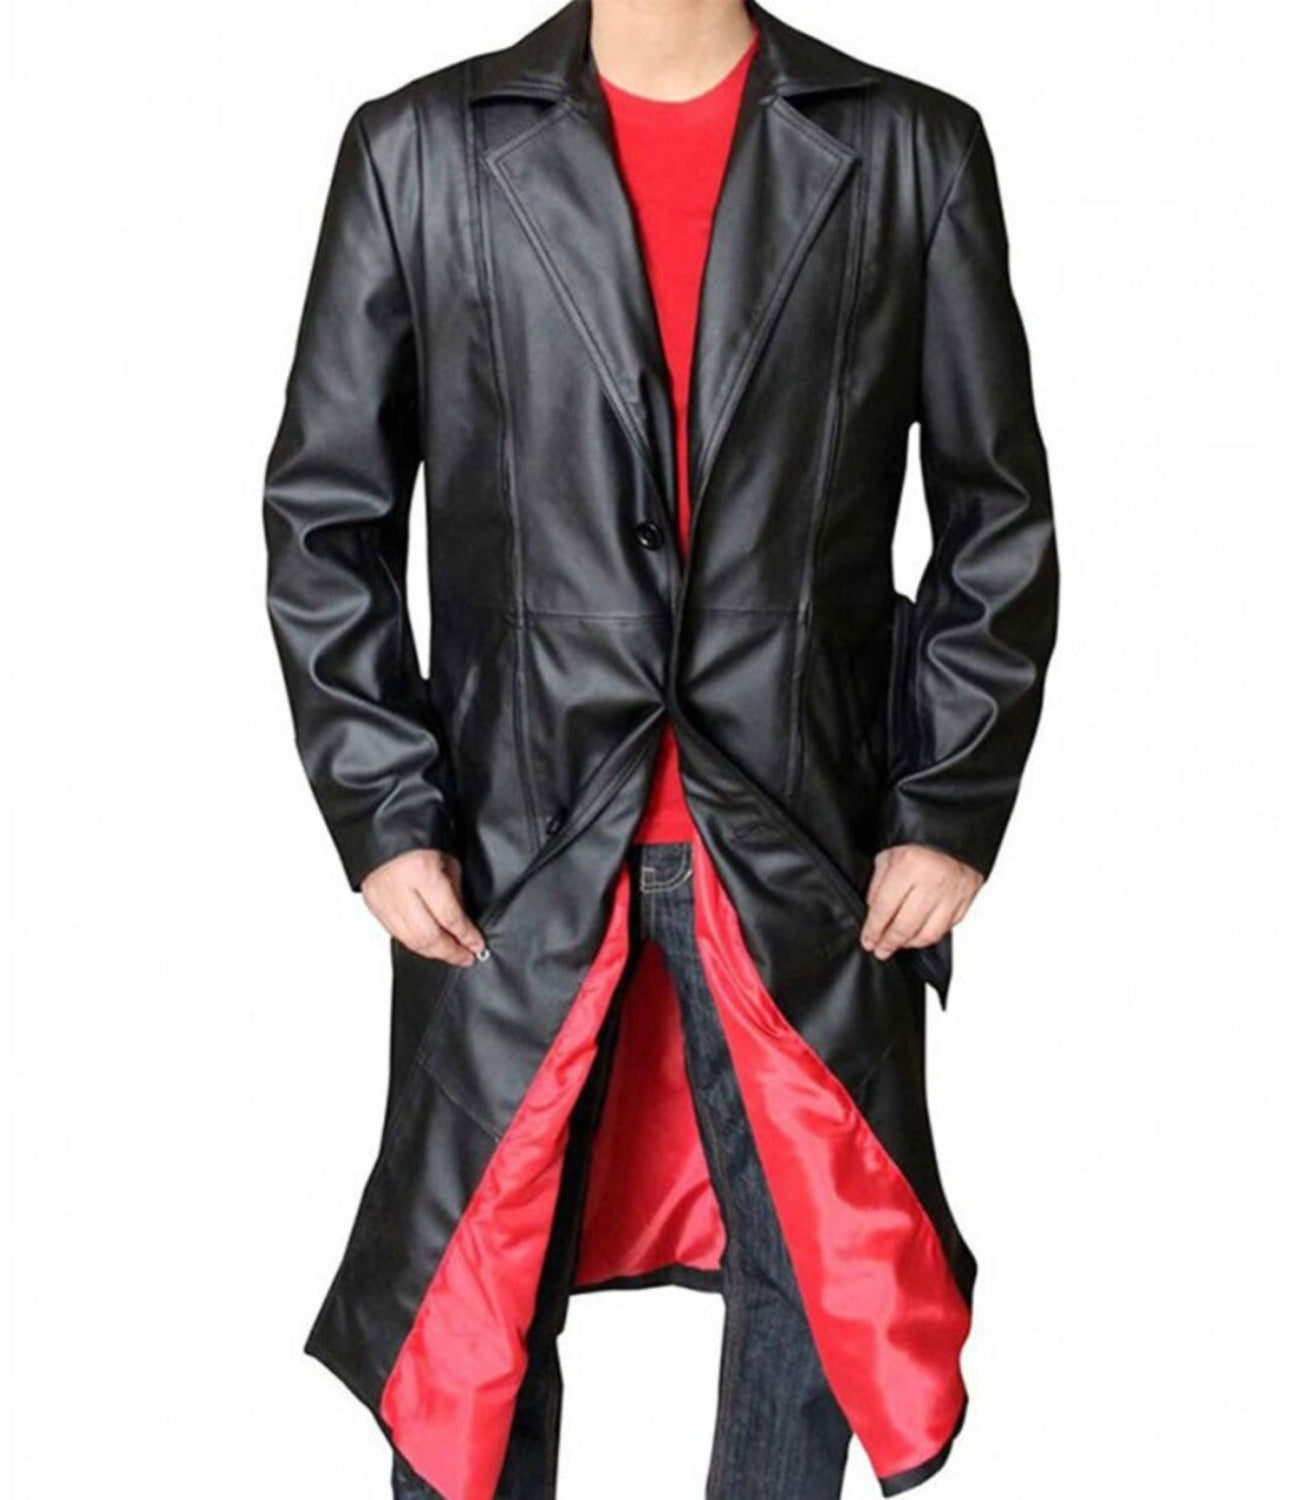 Wesley Snipes Blade Trench Leather Coat Costume